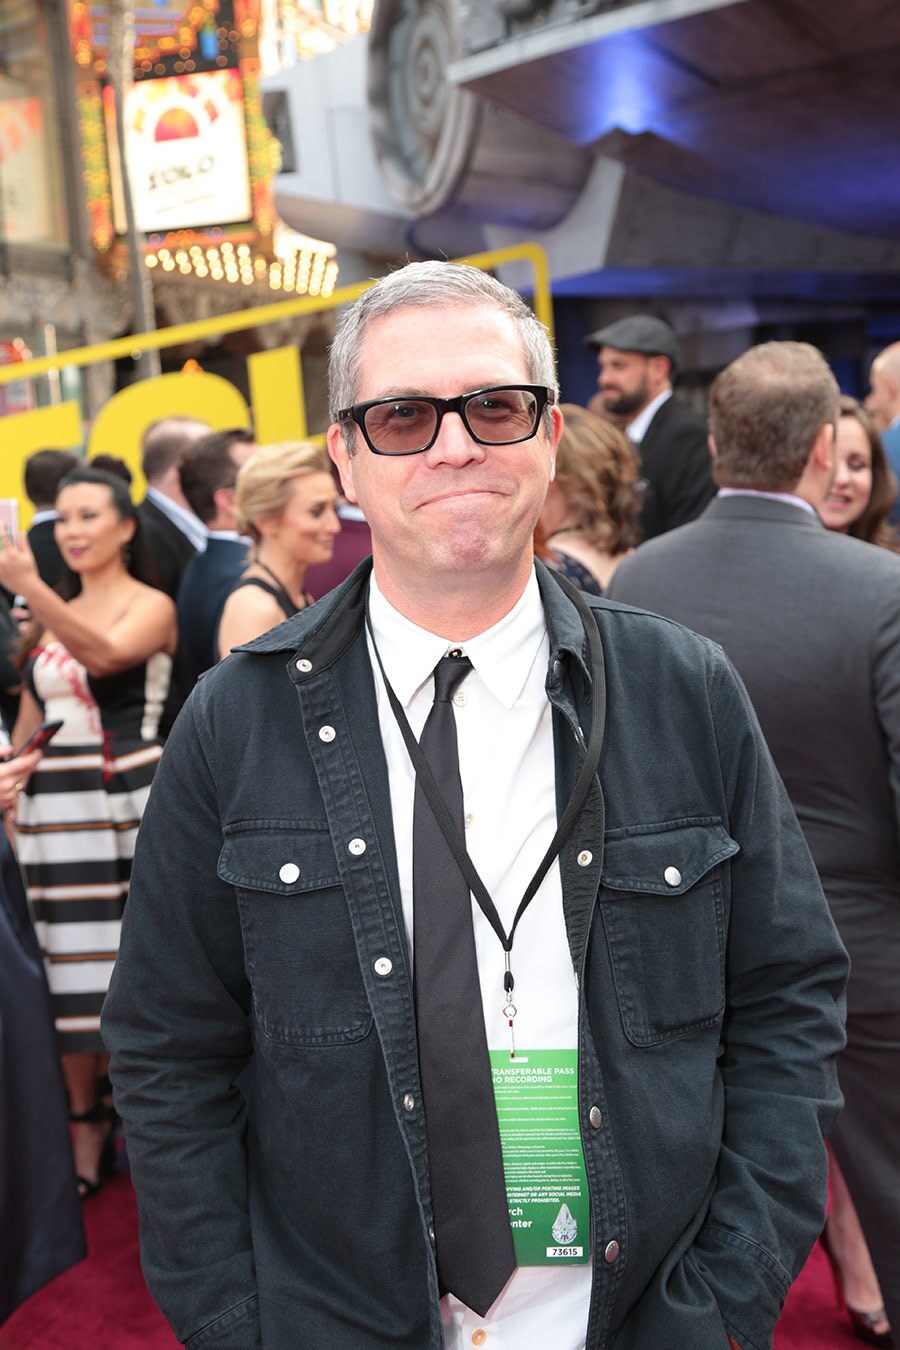 John Powell, composer of Solo: A Star Wars Story, at an event.